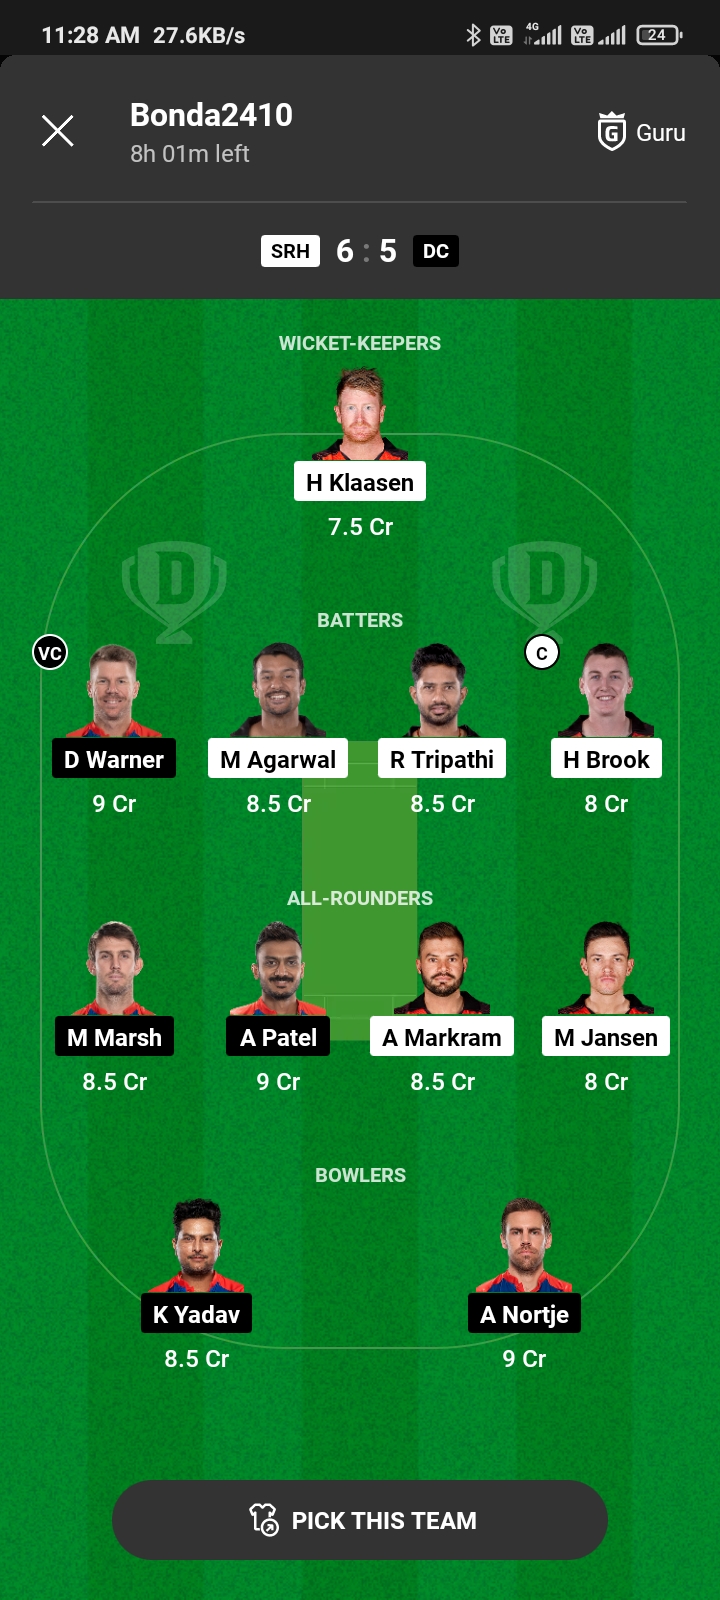 SRH Vs DC Today Dream11 Team Captain And Vice Captain: